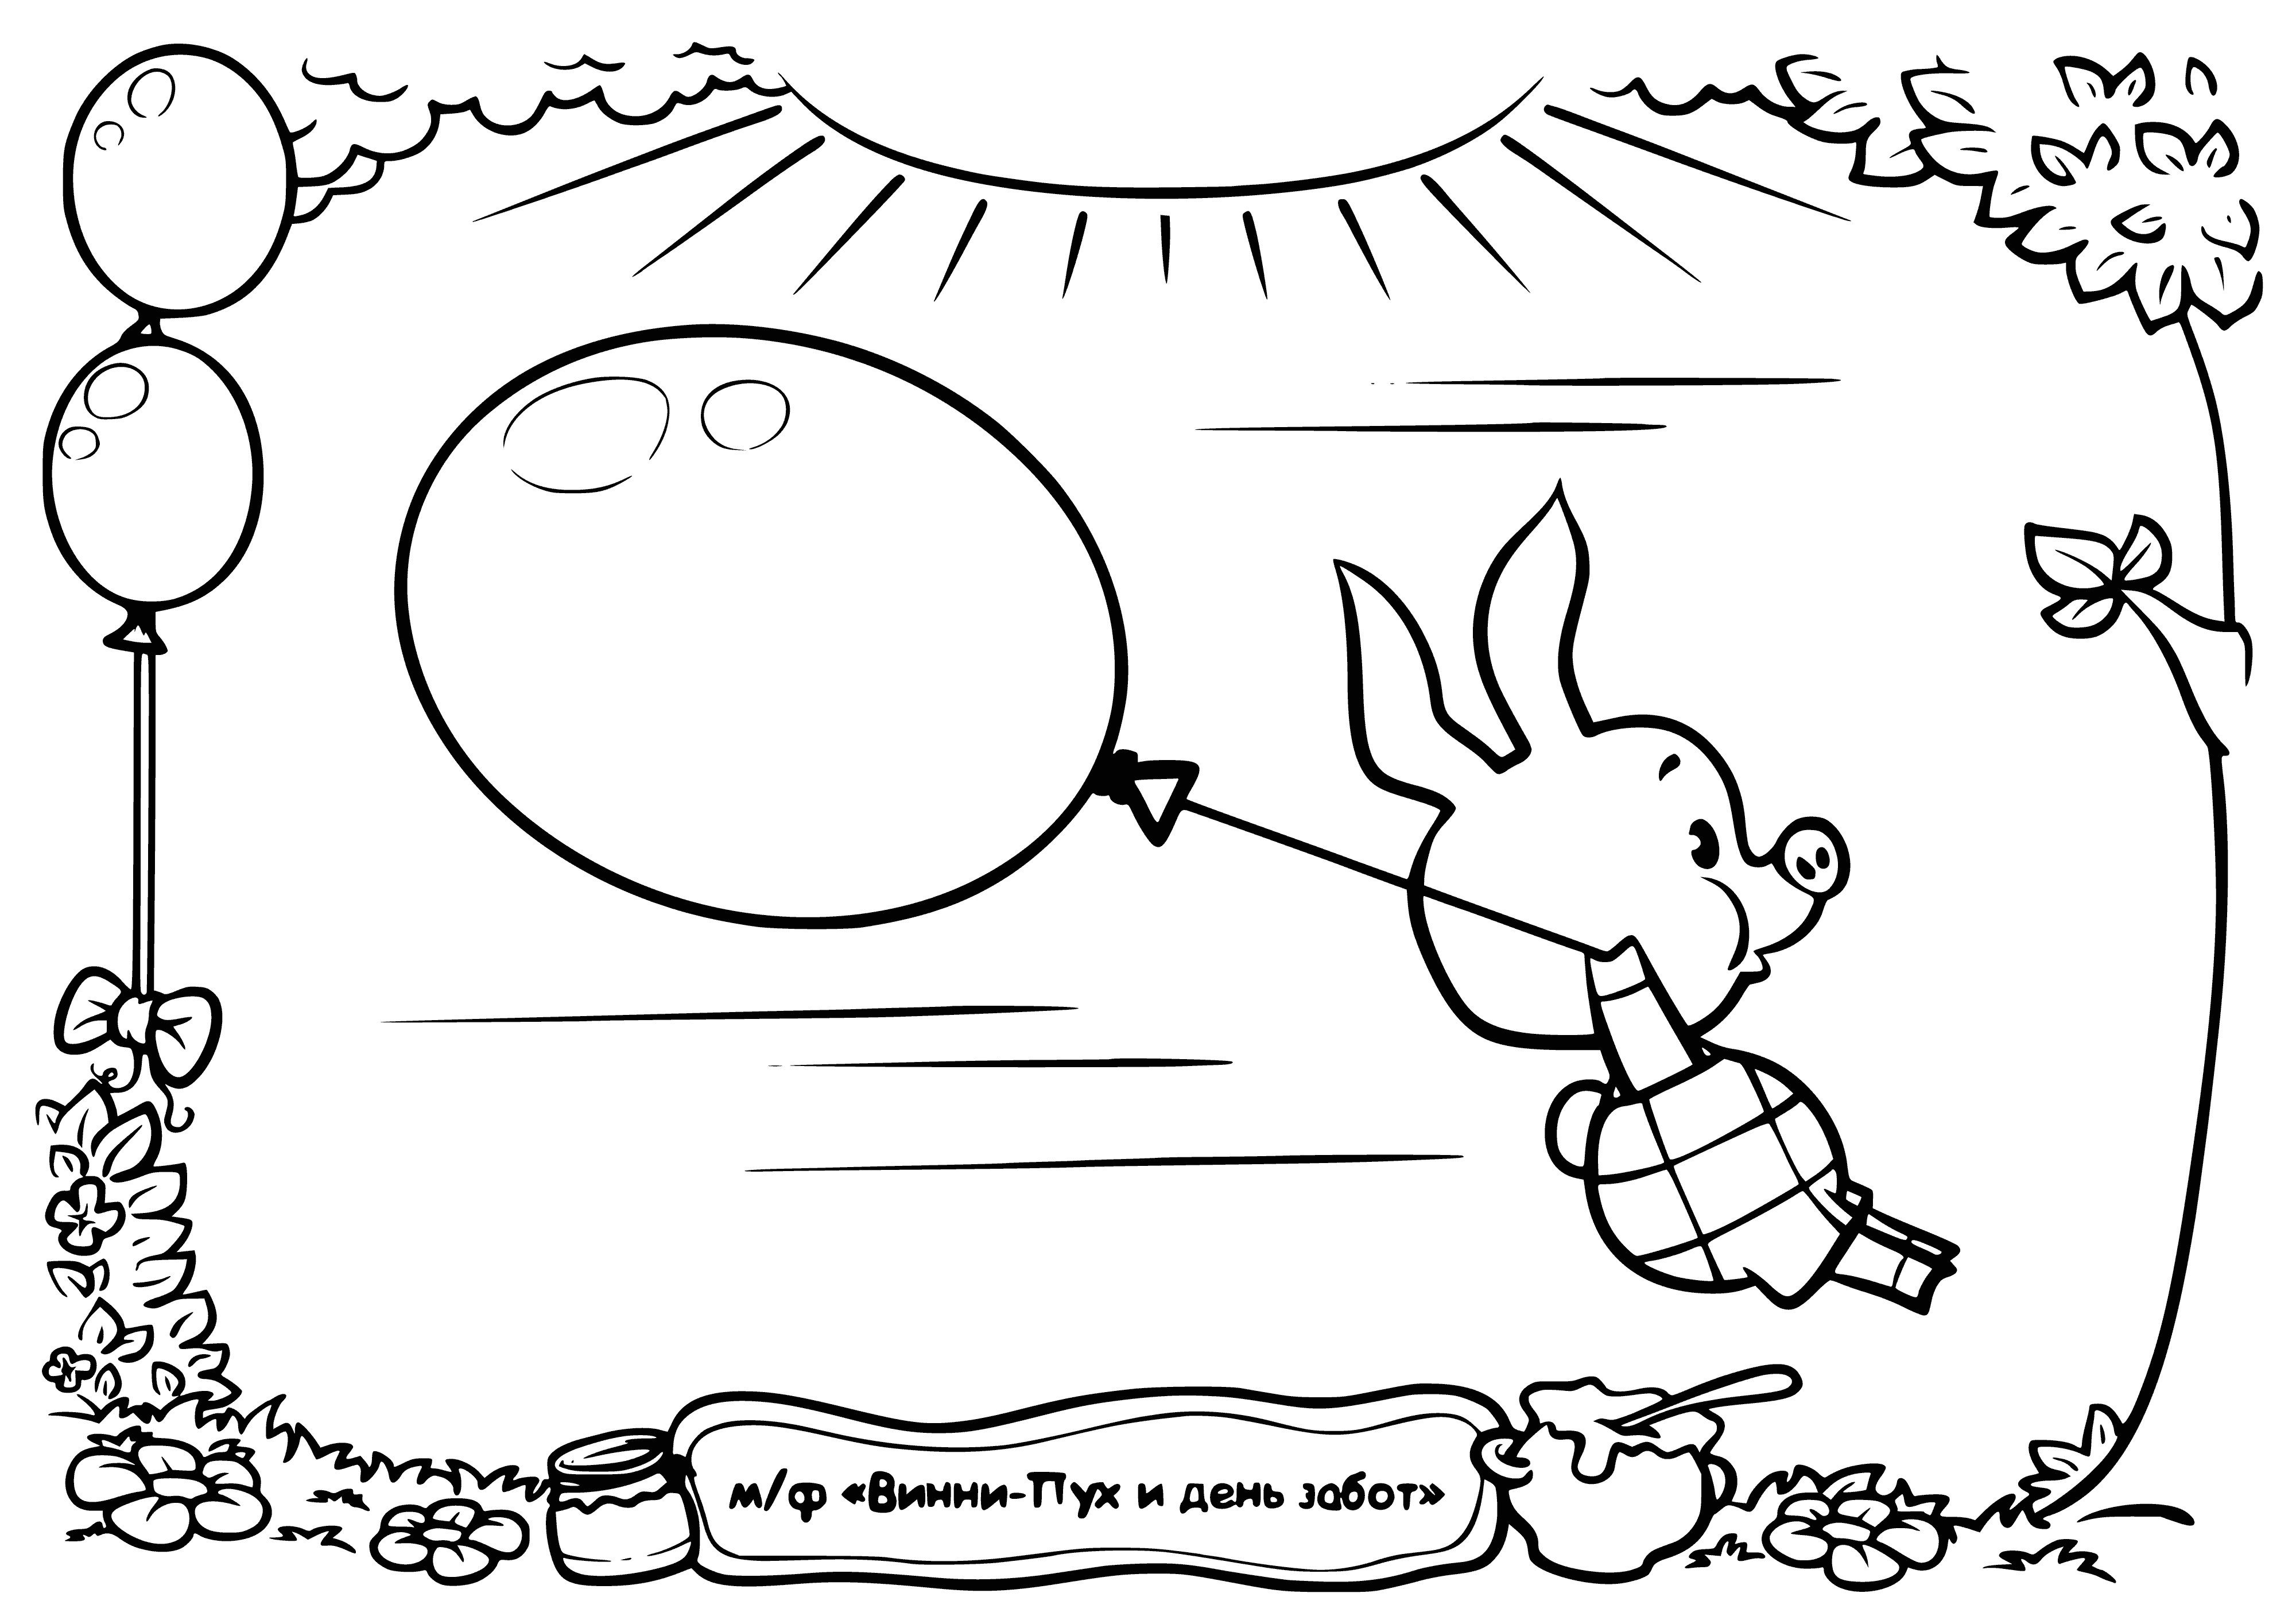 coloring page: Pig is running with a balloon to wish Eeyore a happy bday in the coloring page. #WinnieThePooh #HappyBirthdayEeyore